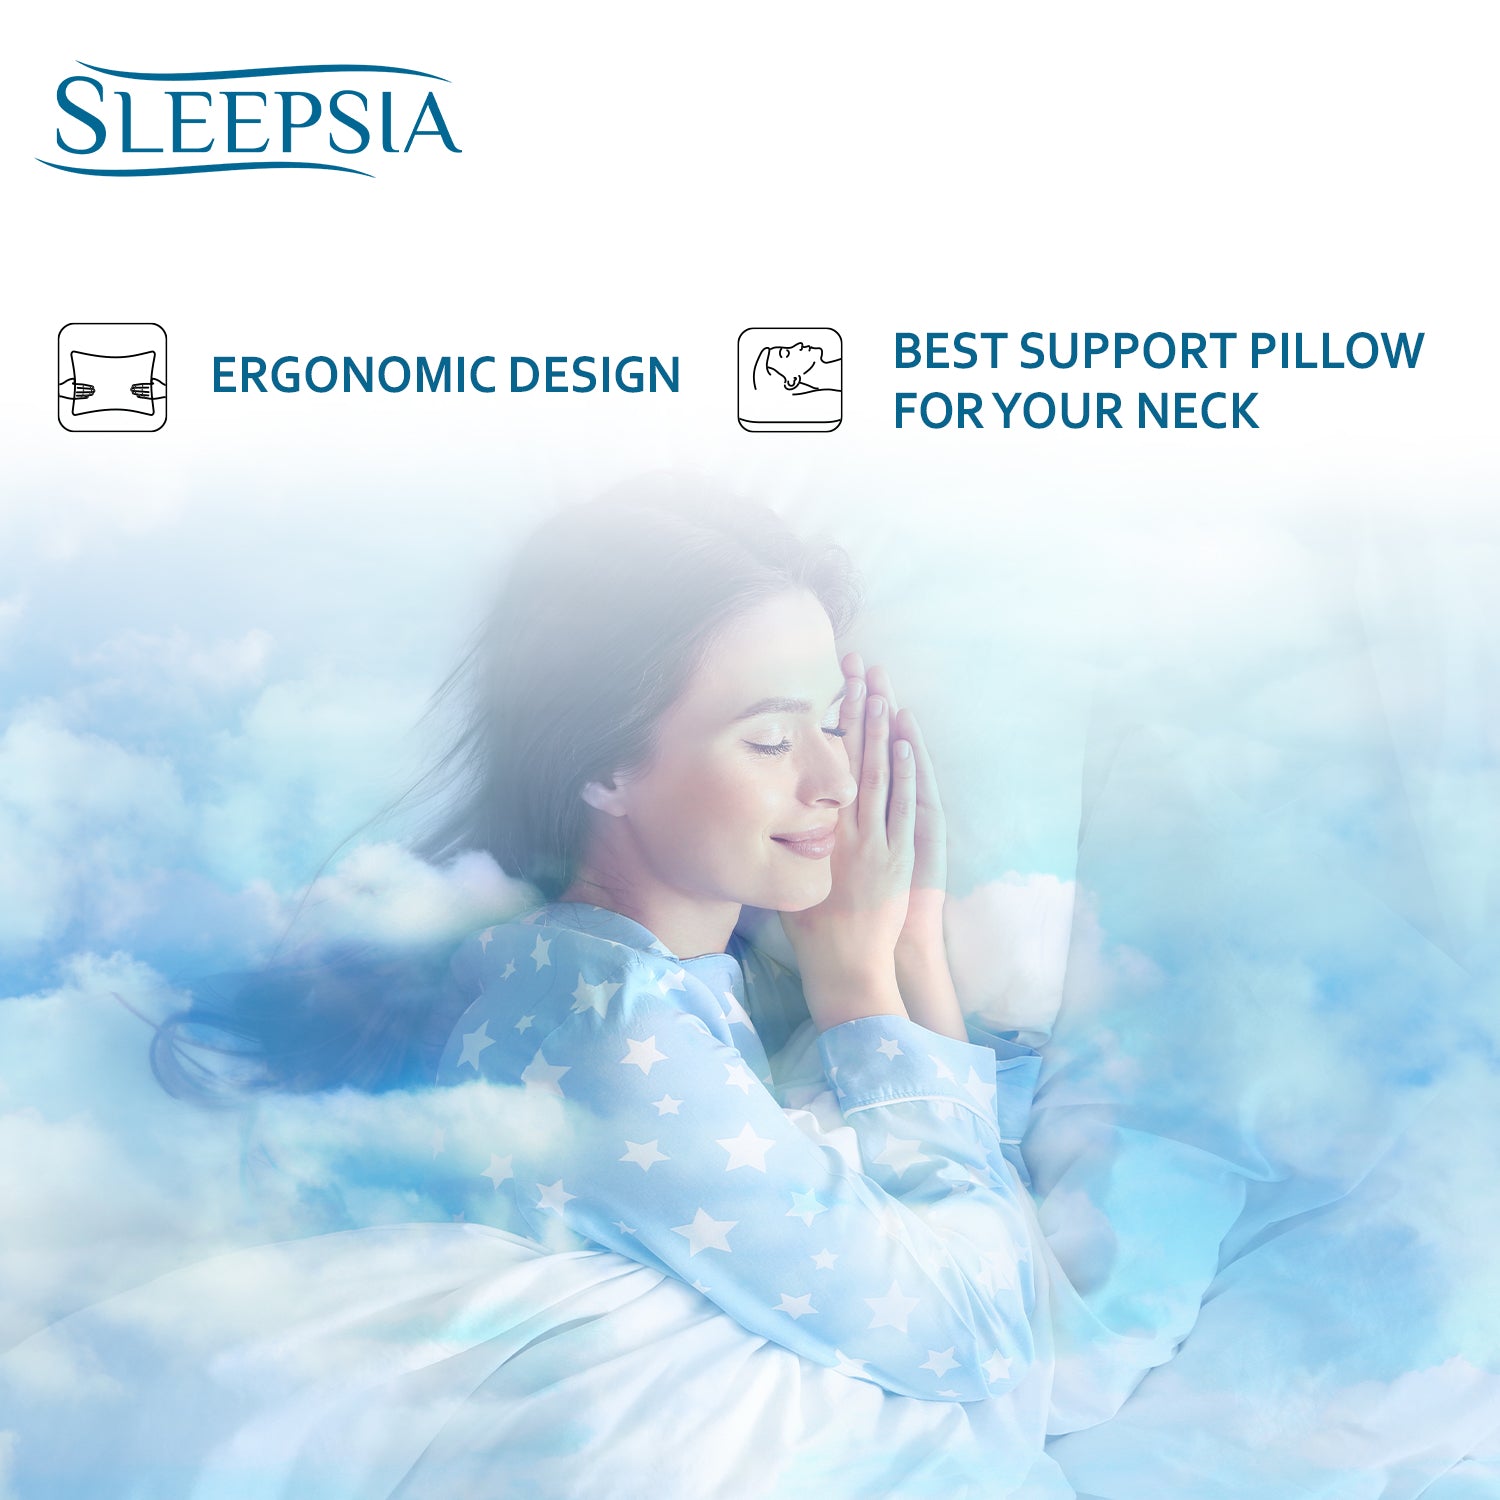 Gel Infused Thick Memory Foam Pillow for Neck Pain